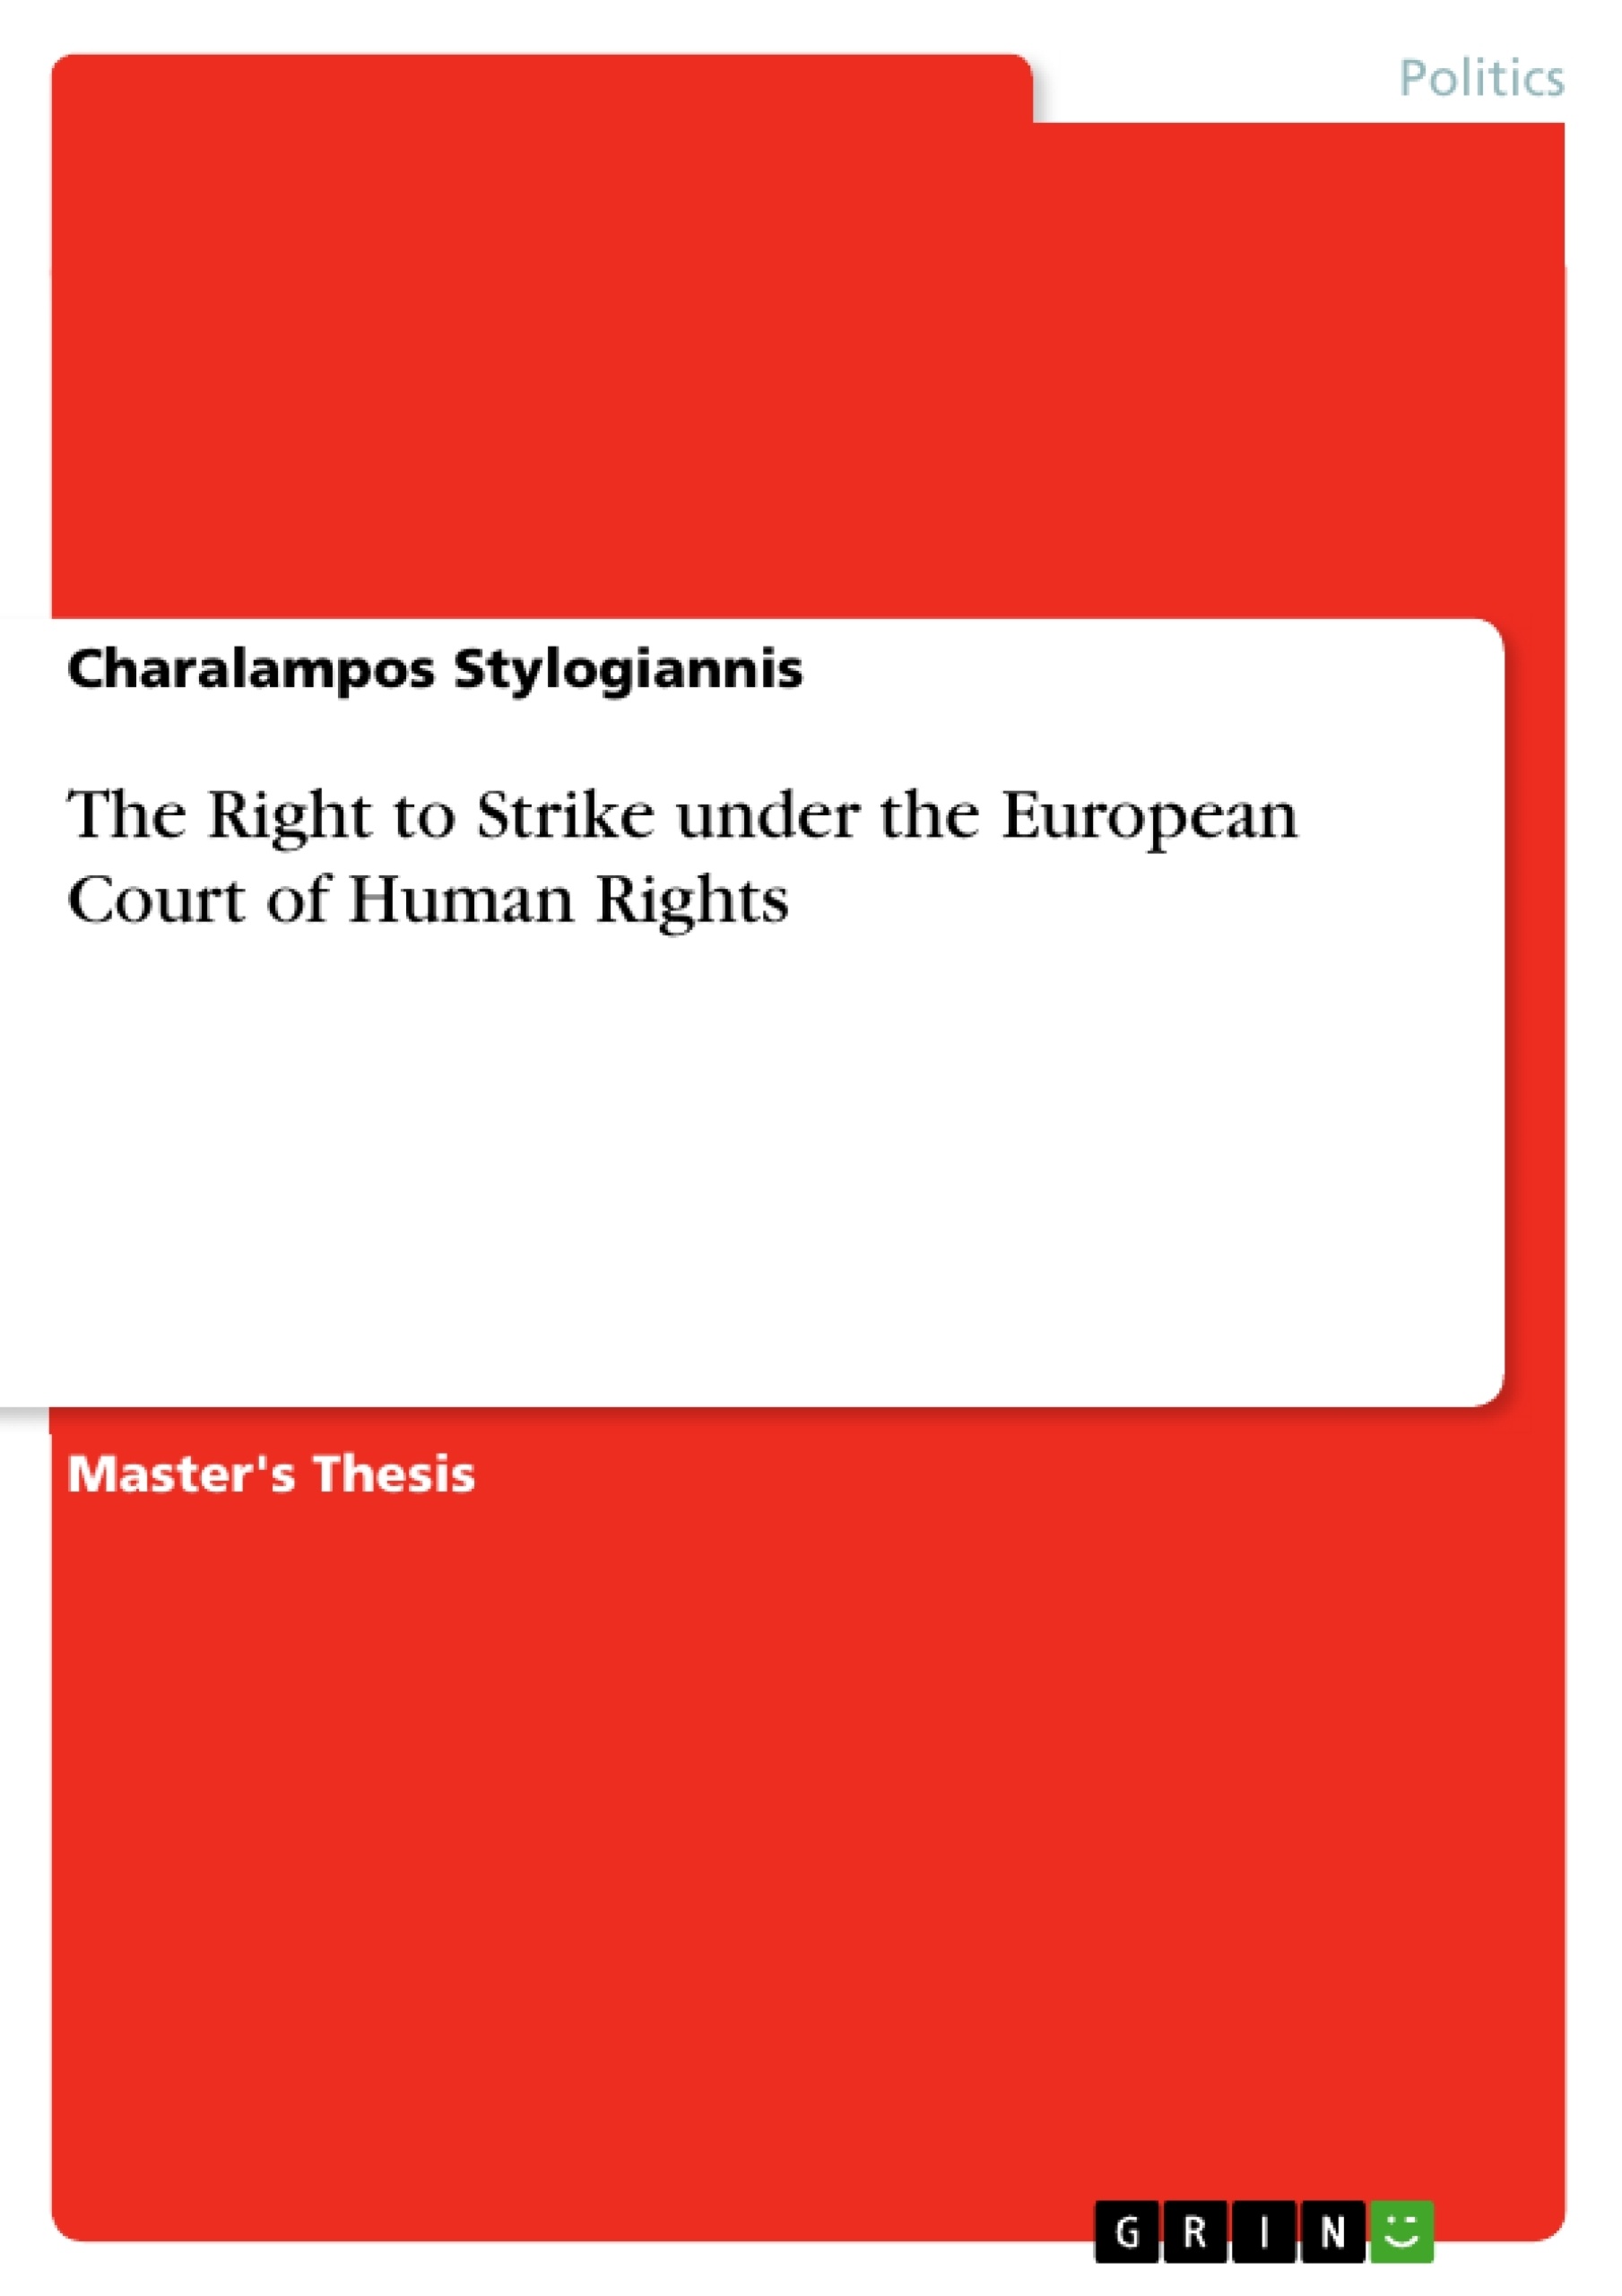 Titre: The Right to Strike under the European Court of Human Rights